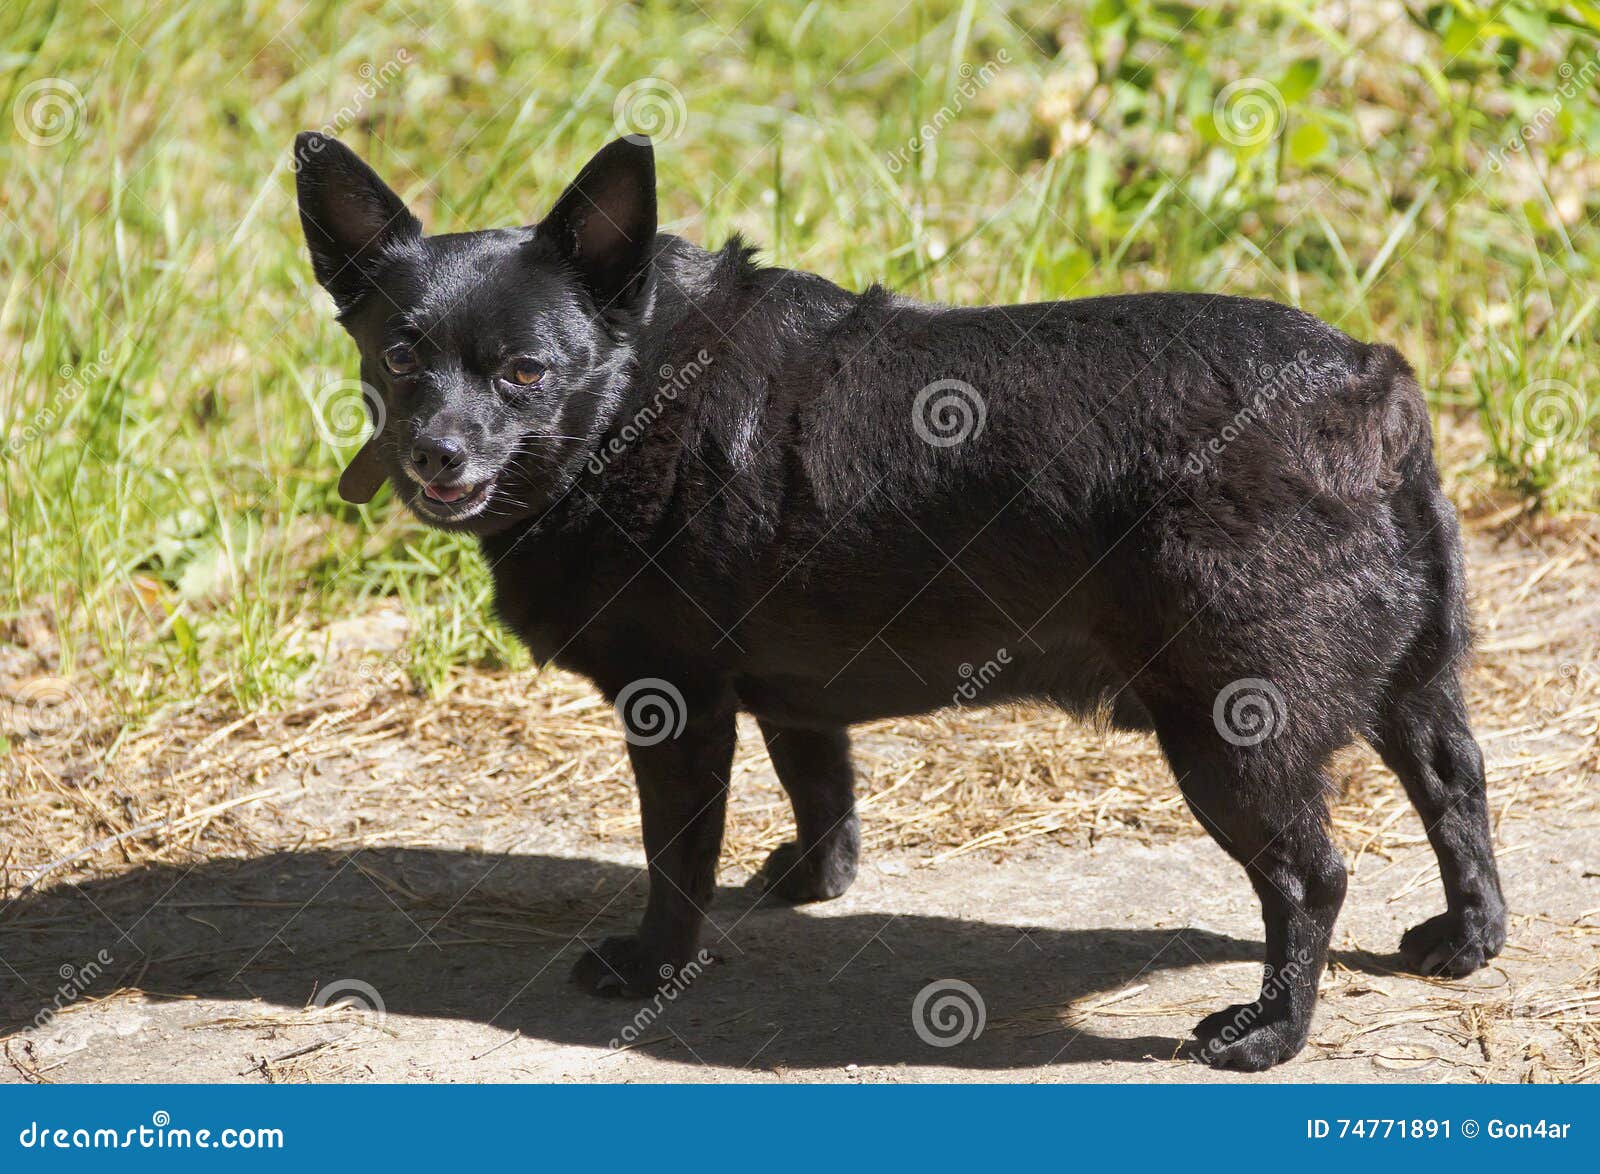 Small Short-haired Black Dog on a Walk. Stock Image - Image of watch, hair:  74771891